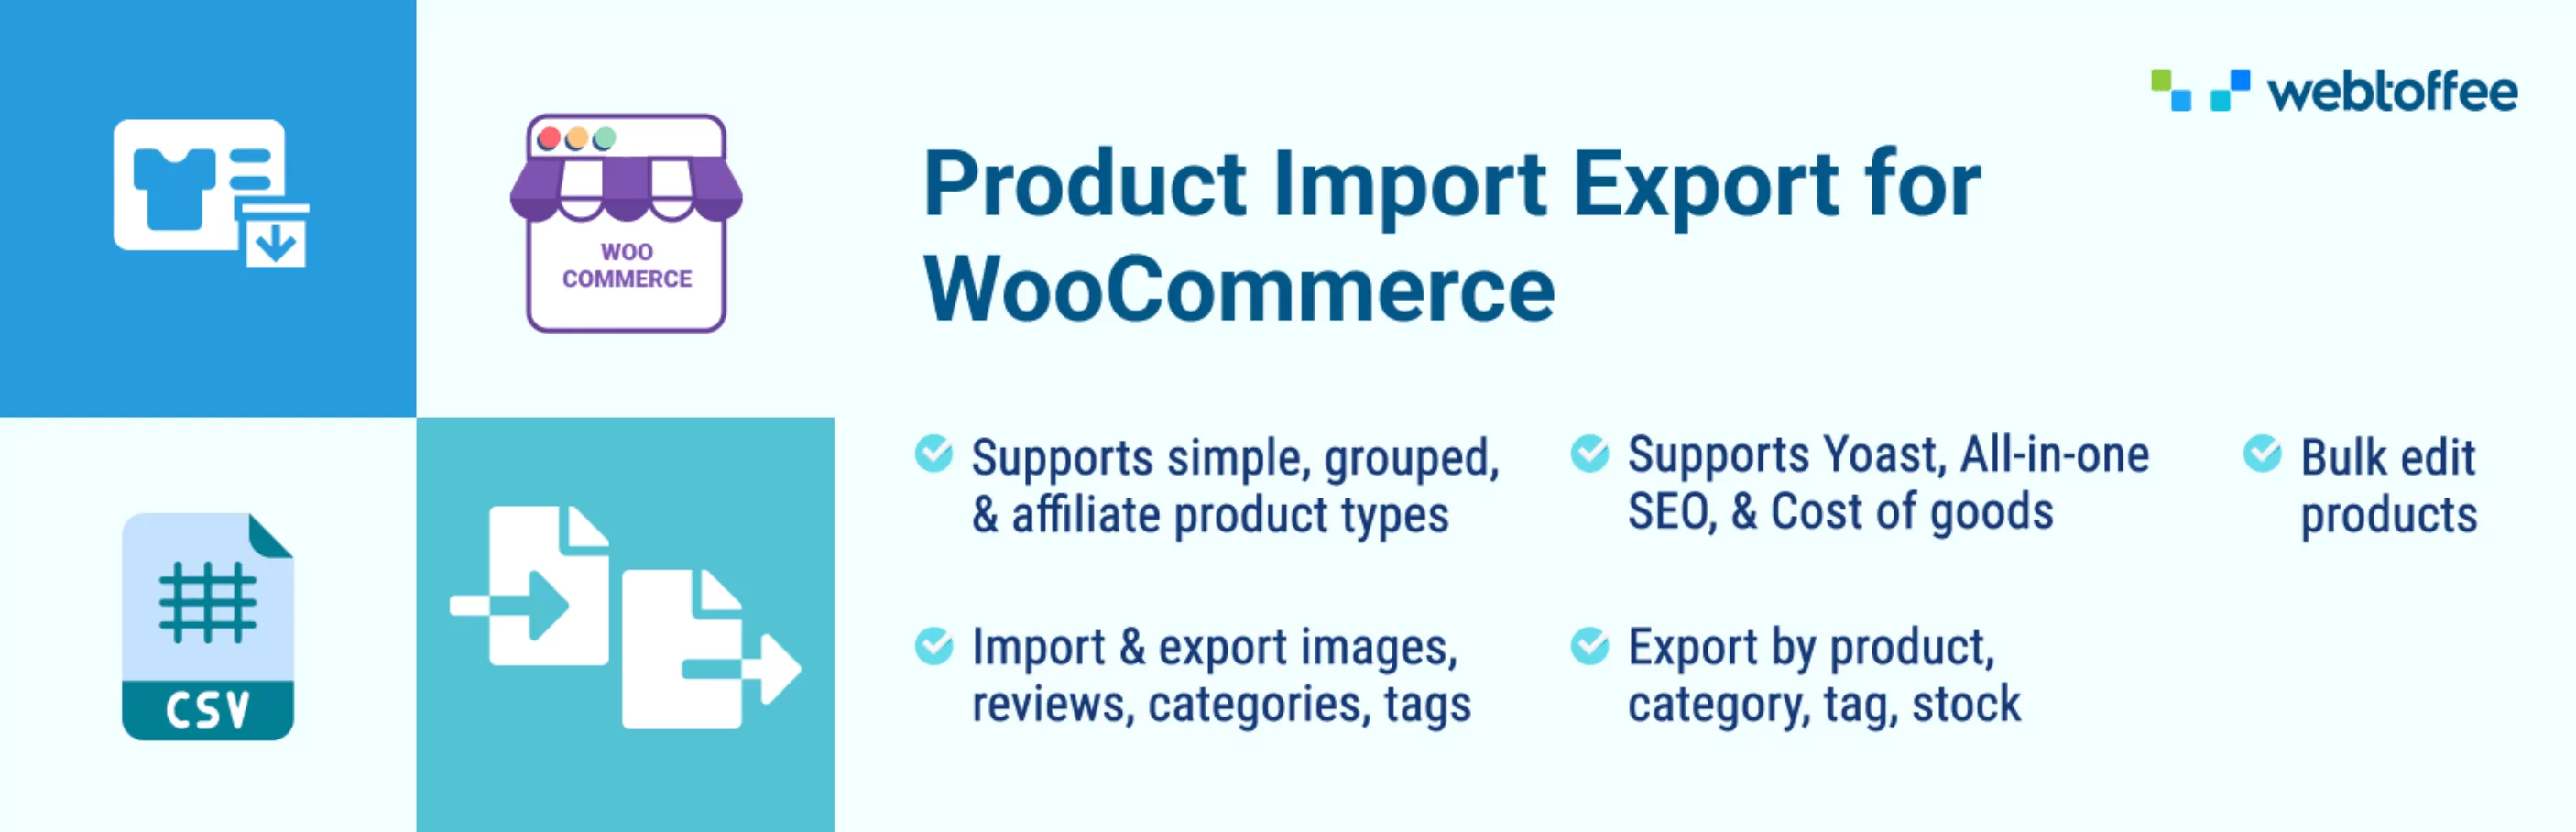 The Product Import Export for WooCommerce